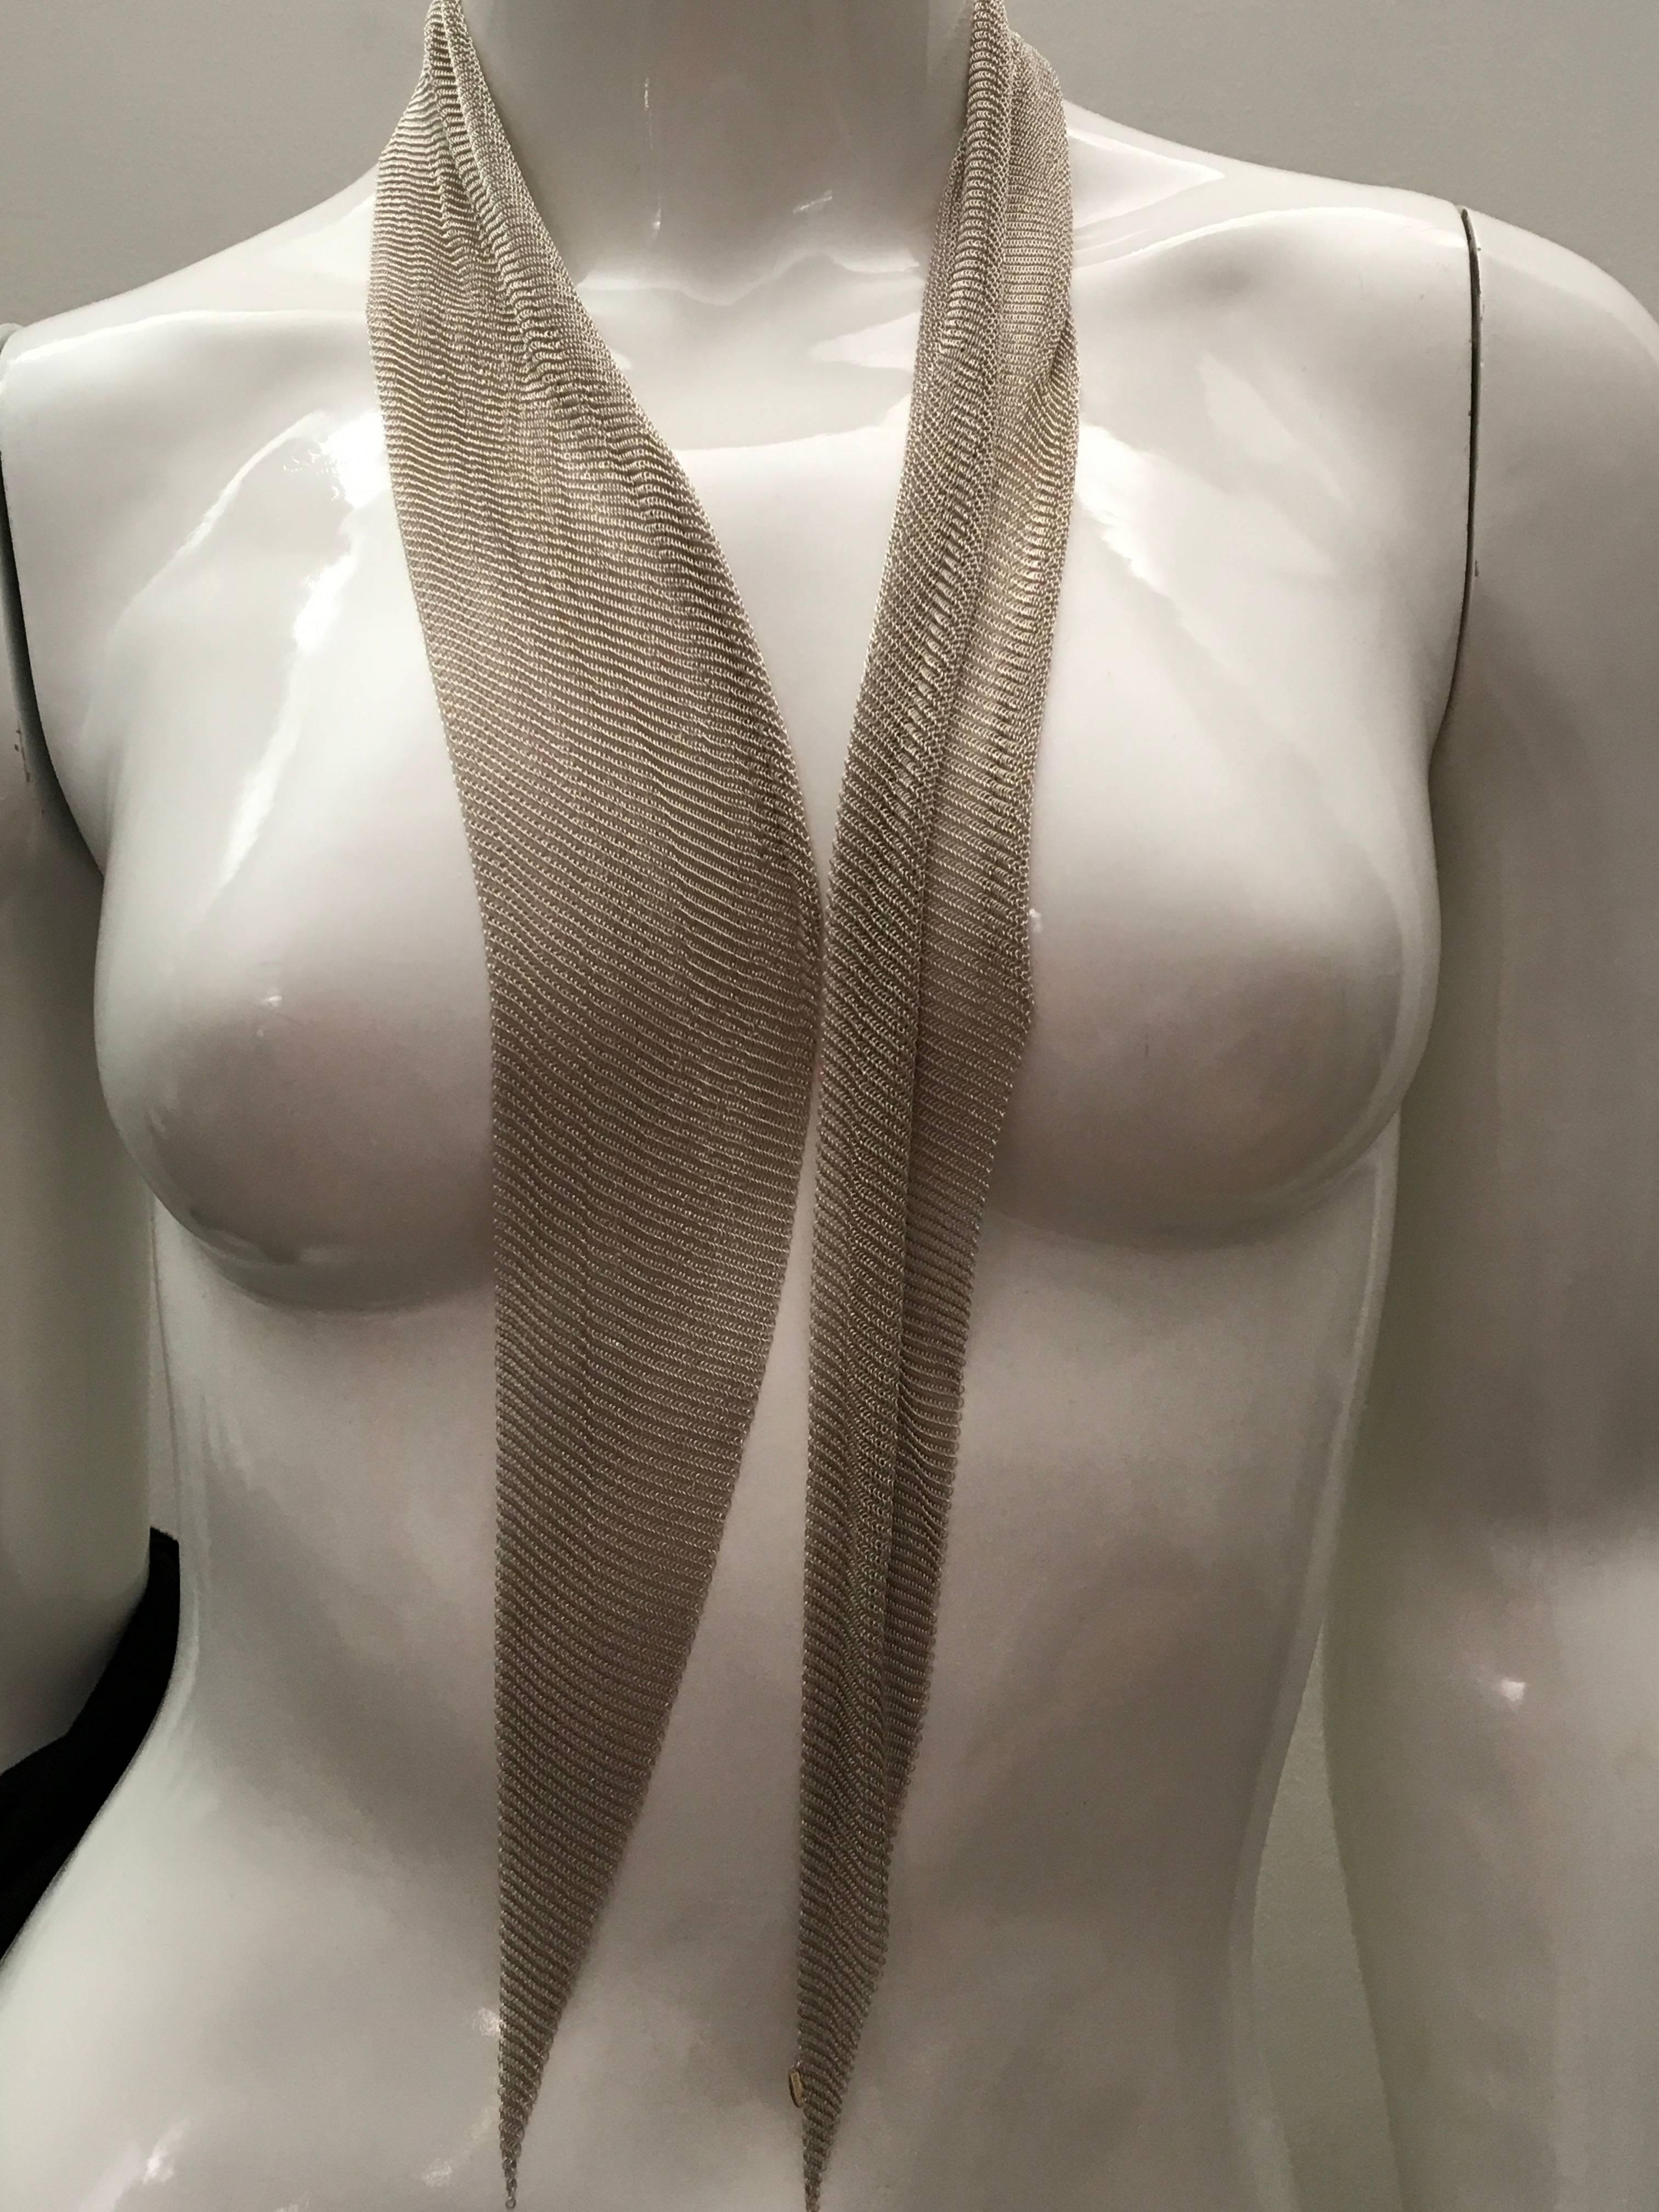 Presented here is a beautiful mesh scarf from Tiffany and Co. This magnificent mesh scarf has a total weight of 131 grams of sterling silver. The scarf measures 41.5 inches long and 5 inches wide at the center. The scarf is constructed of a very